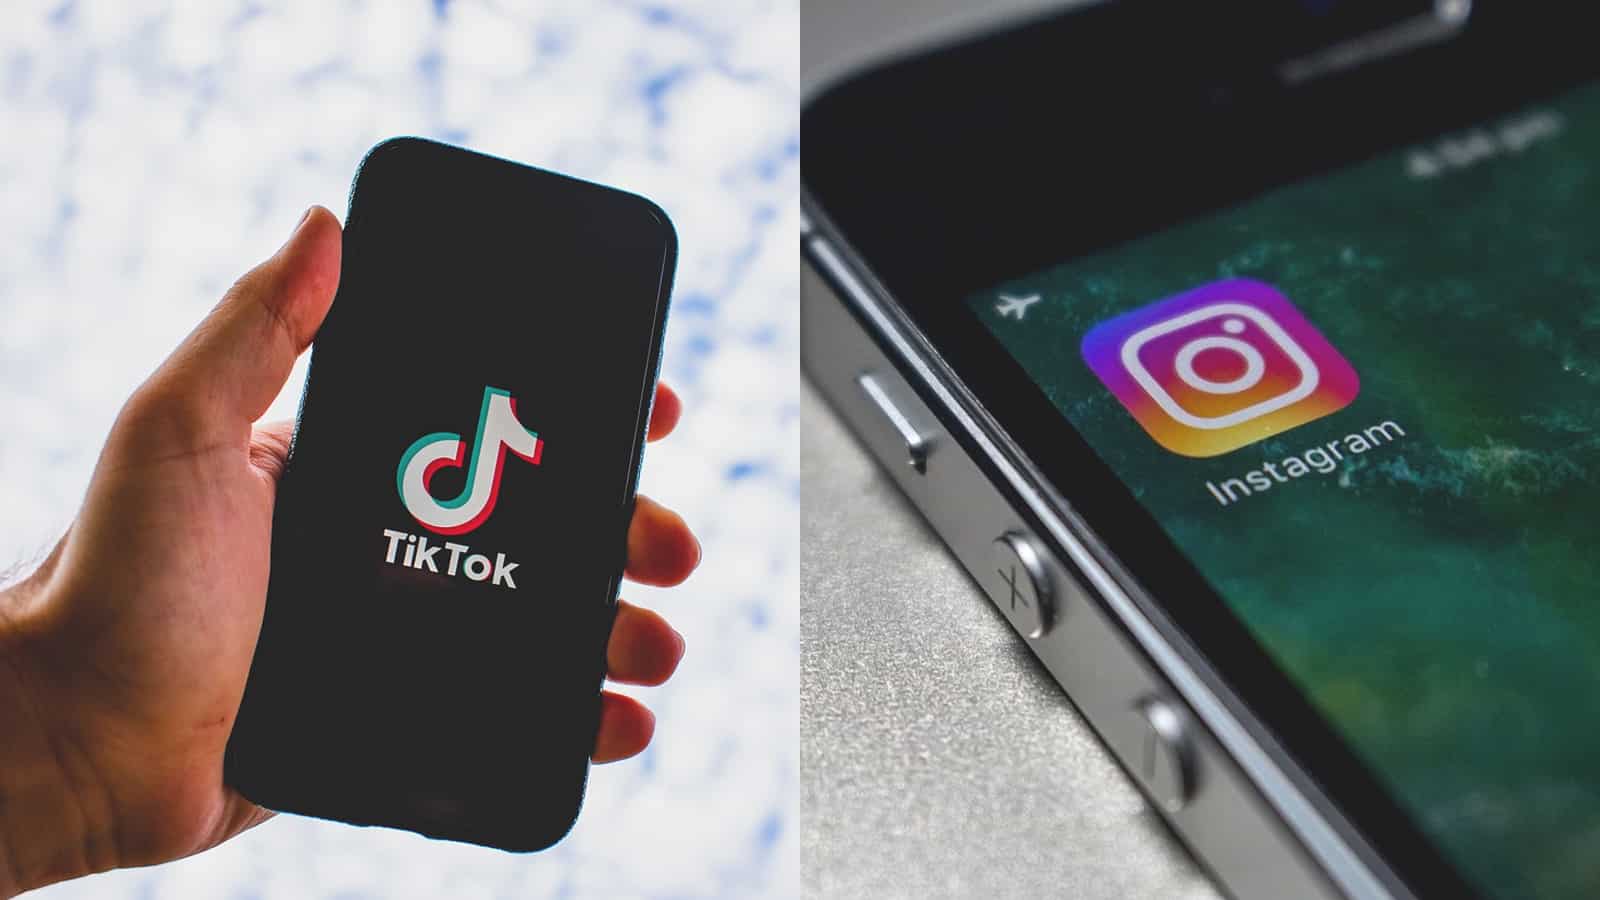 An image of two phone screens showing TikTok and Instagram